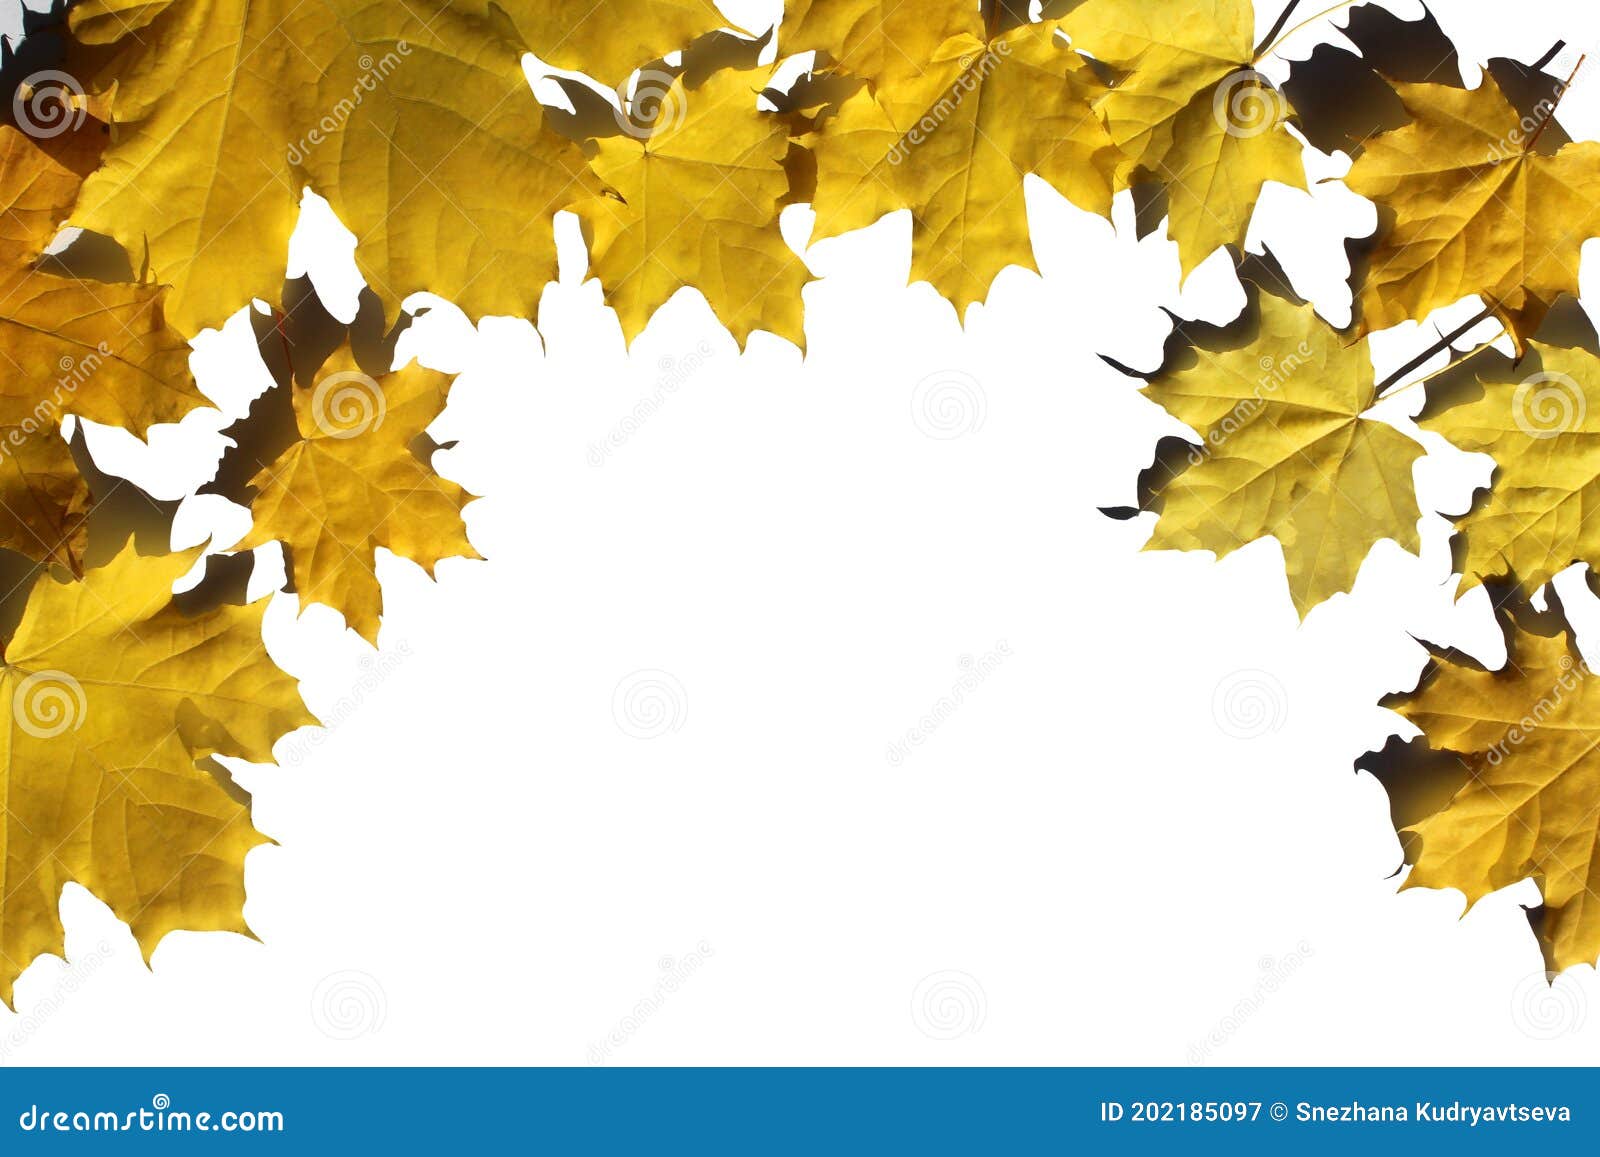 yellow maple leaves lie in the form of a frame on a white background